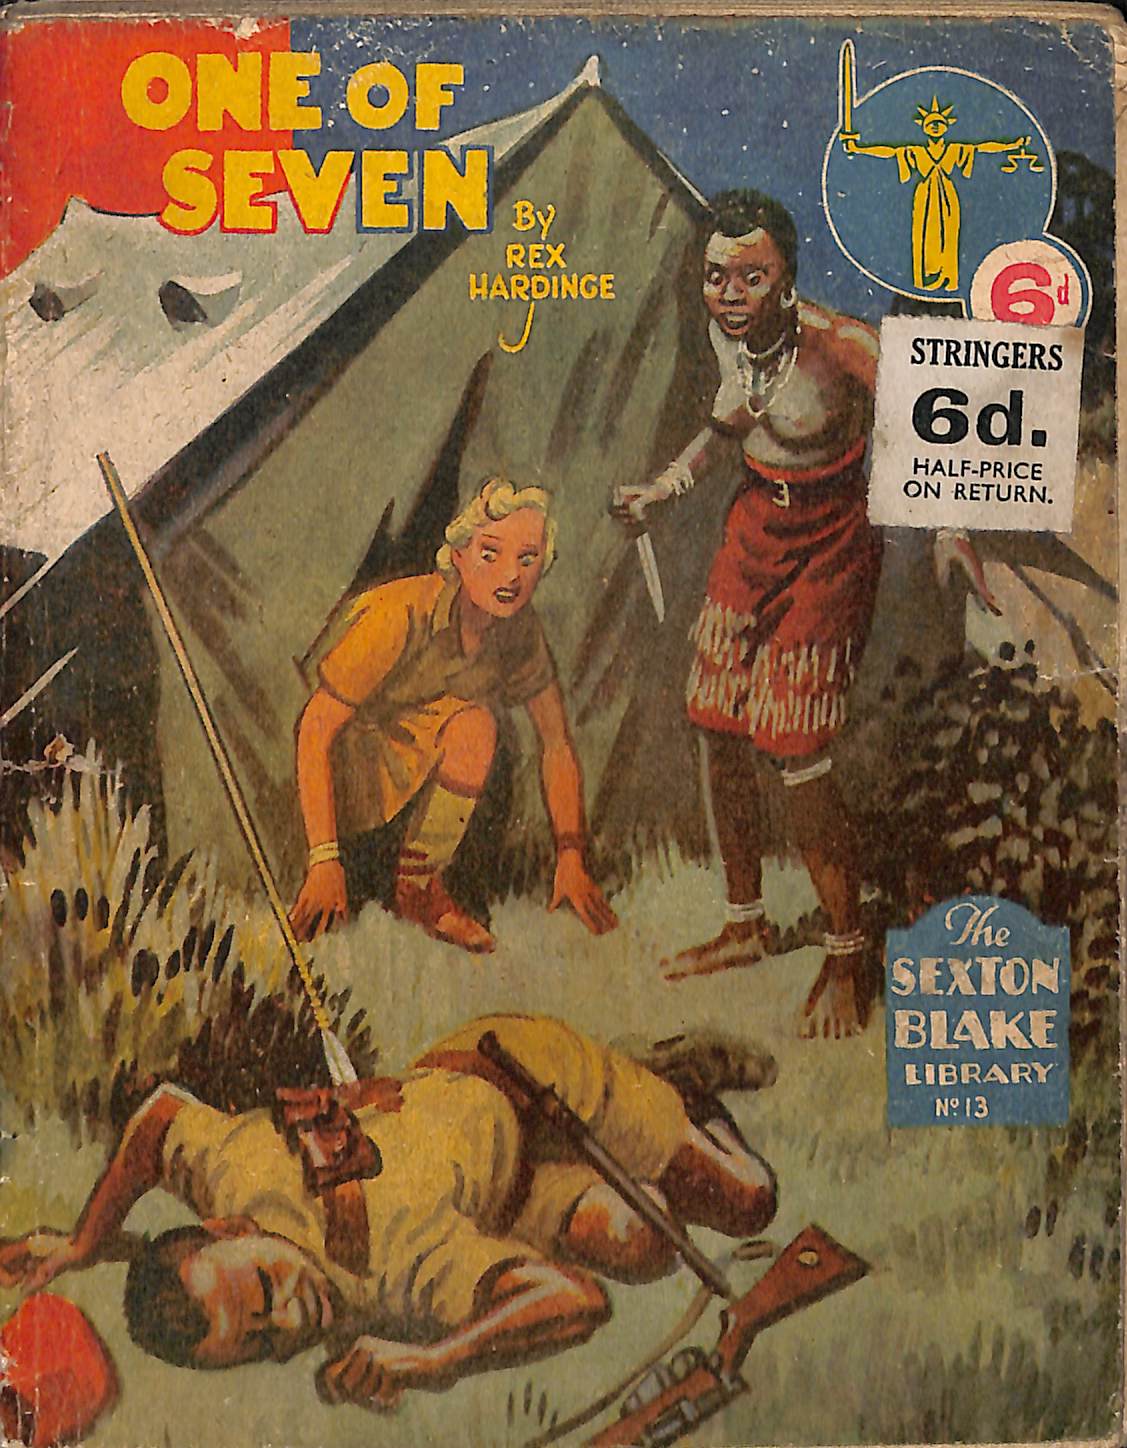 Book Cover For Sexton Blake Library S3 13 - One of Seven